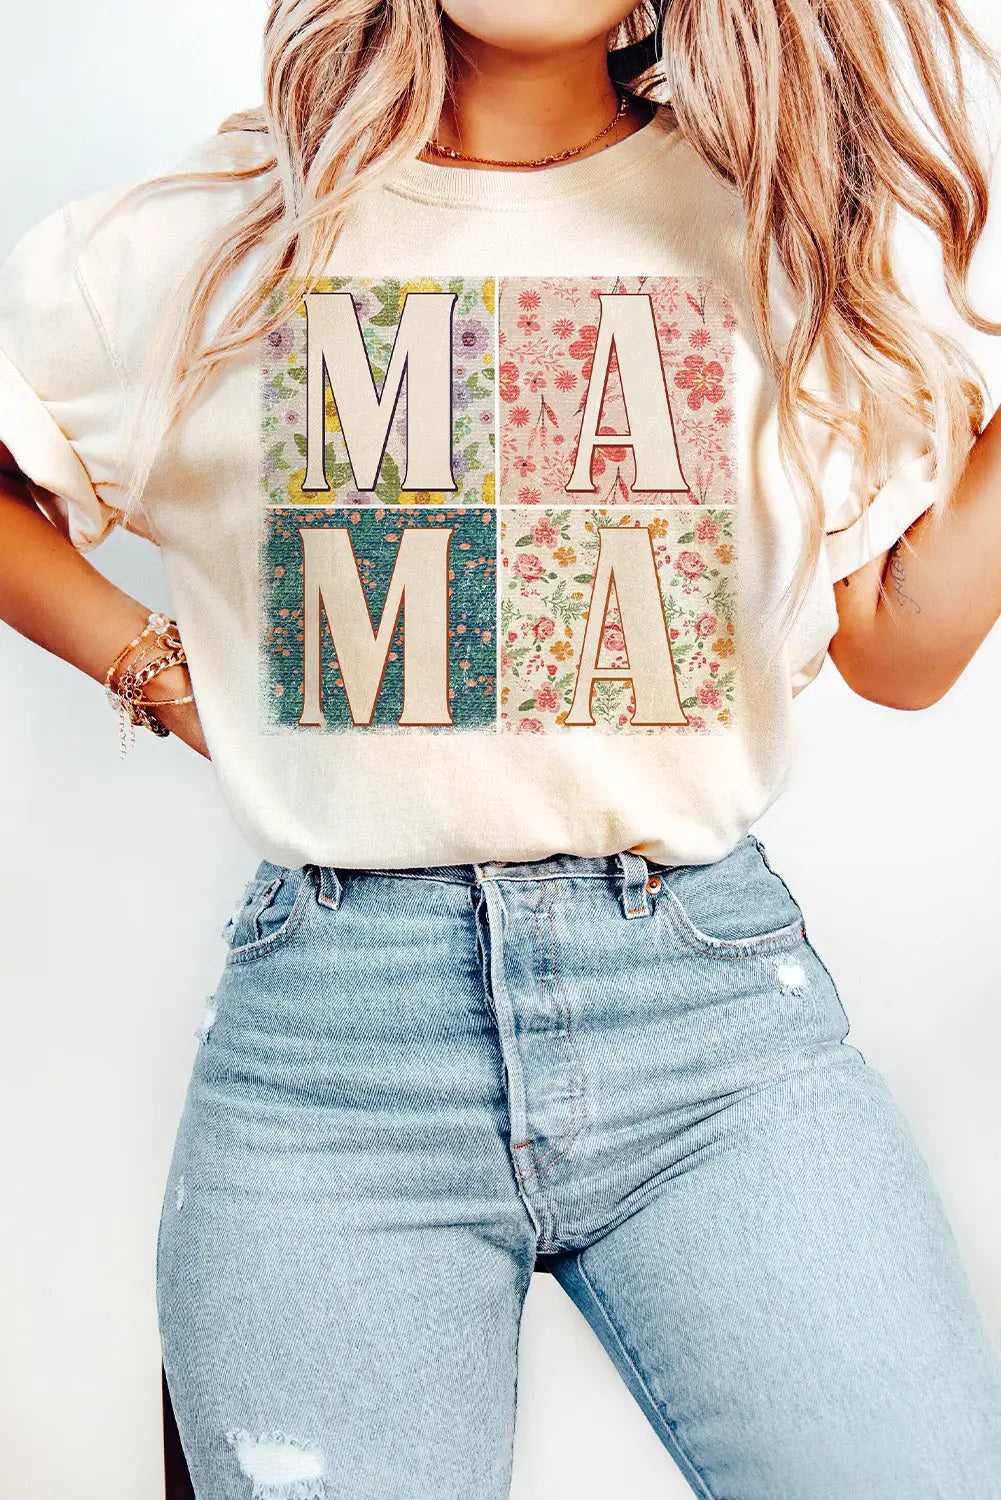 White mama floral block graphic casual t-shirt - s / 62% polyester + 32% cotton + 6% elastane - t-shirts